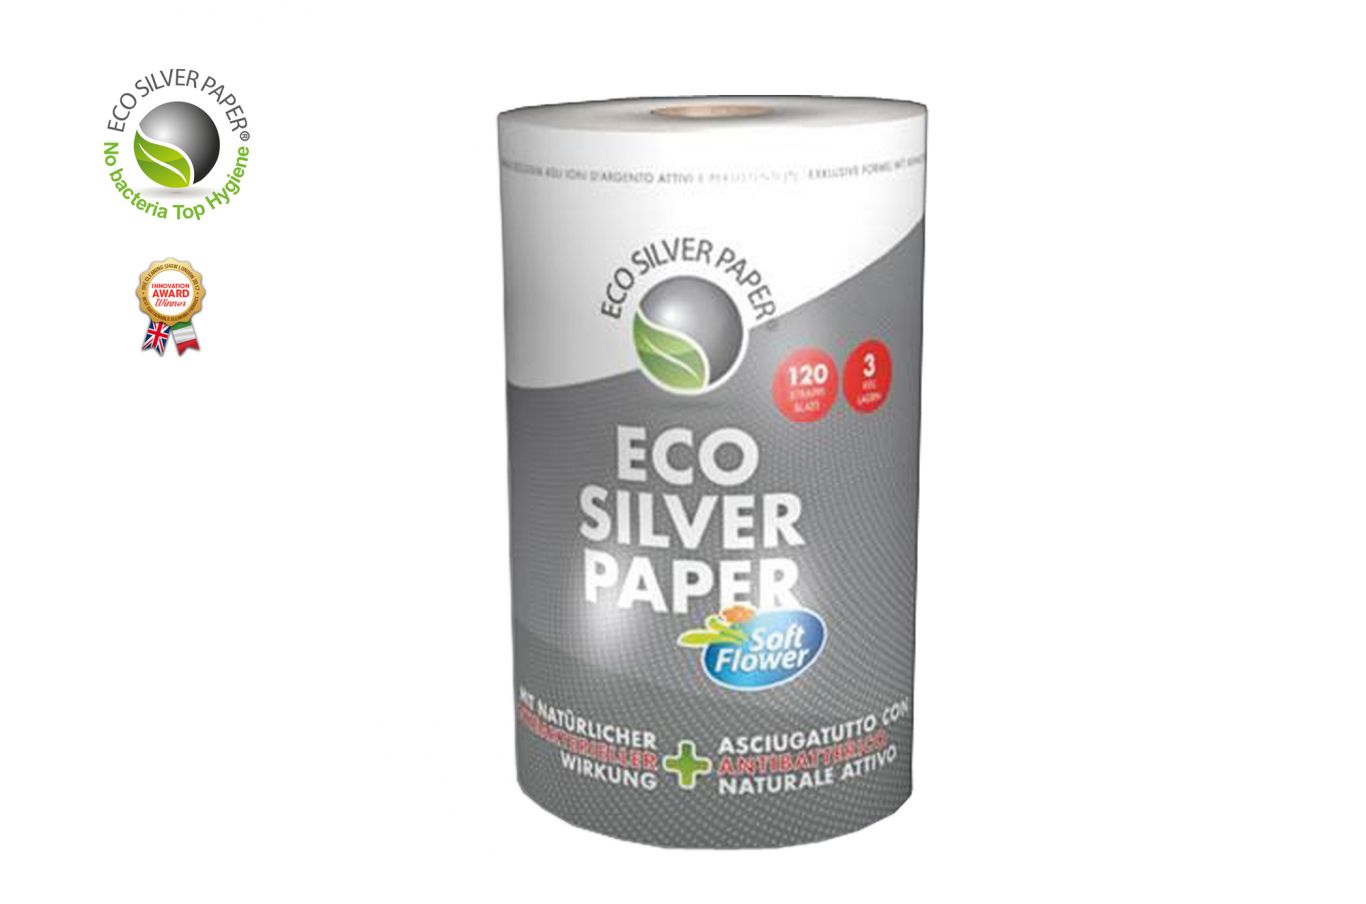 DEFENDO® KITCHEN PAPER ANTIBACTERIAL 3 PLY ROLL ECO SILVER